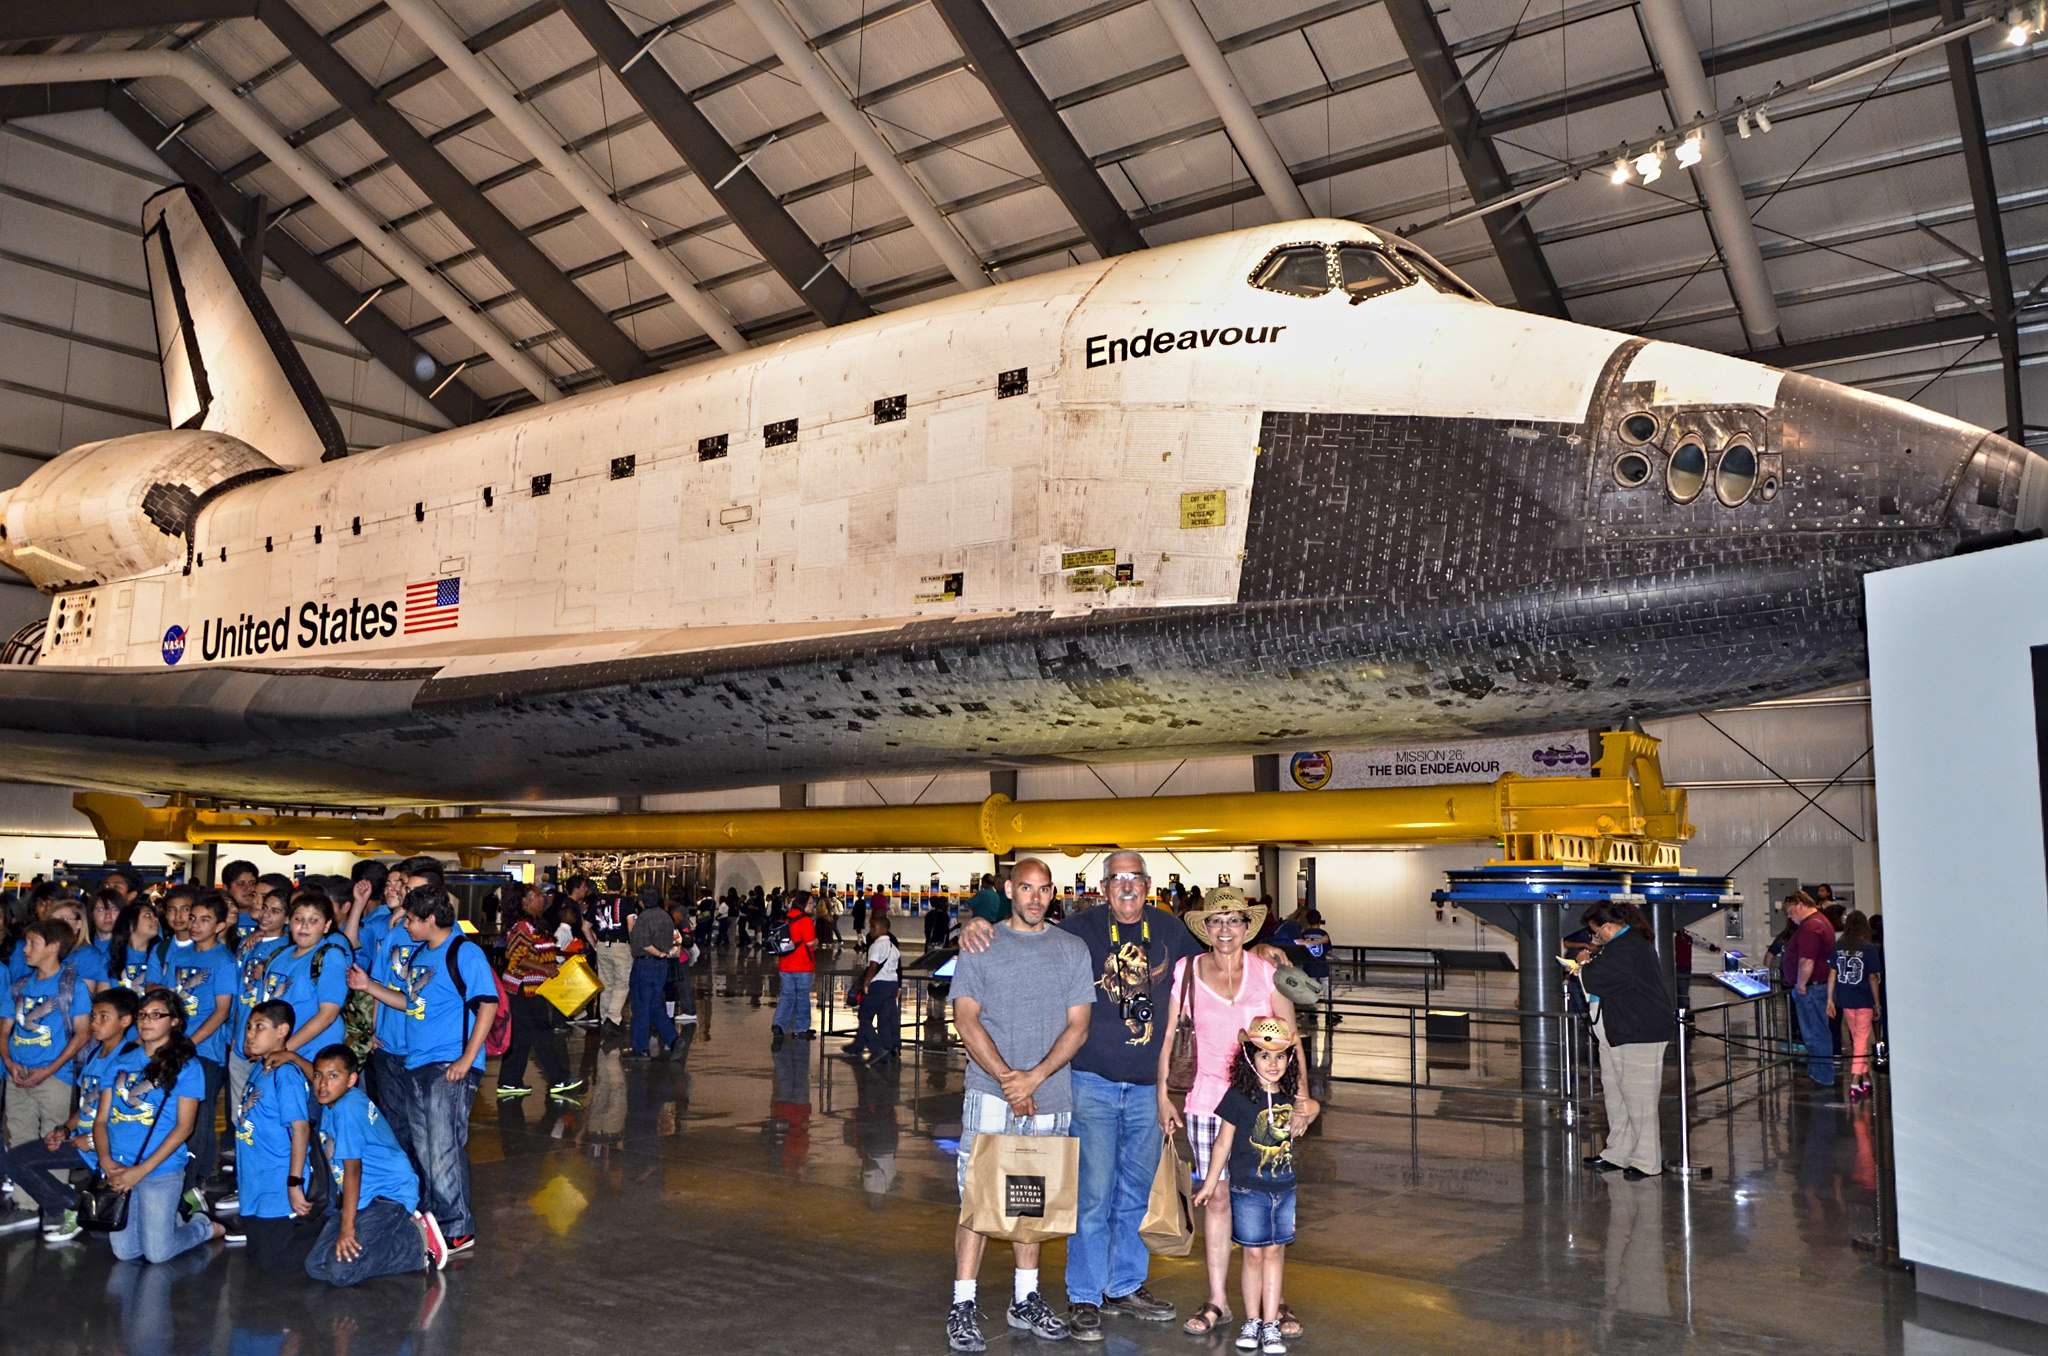 Endeavor To See the Endeavour at the California Science ...